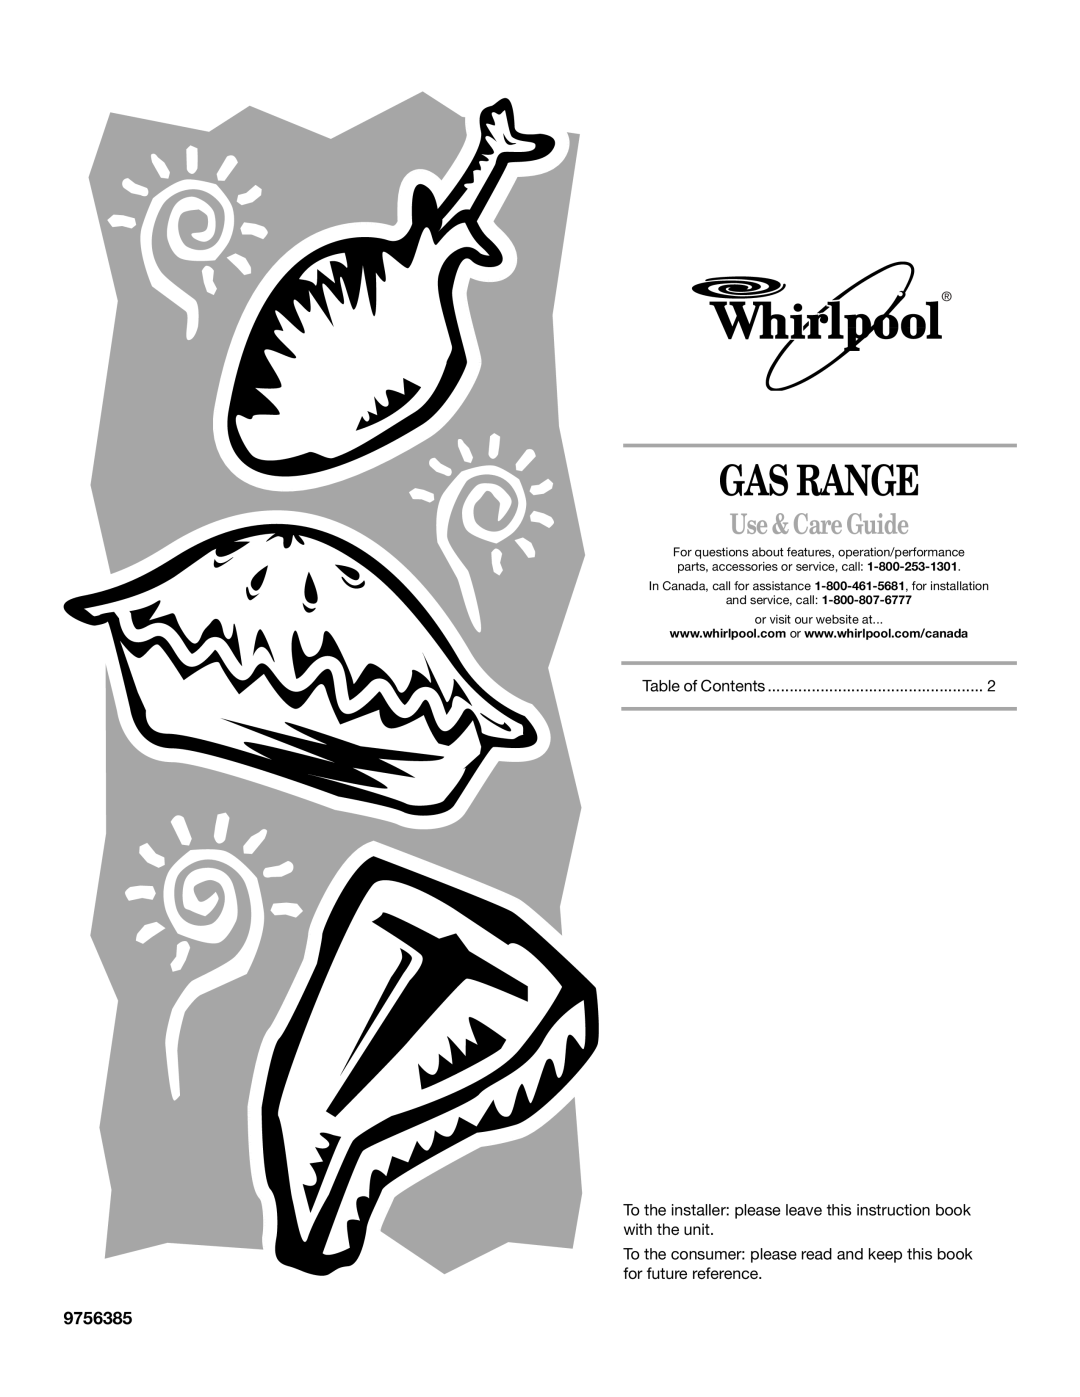 Whirlpool SF367LEMB0 manual Gas Range, Use & Care Guide, 9756385, and service, call or visit our website at 